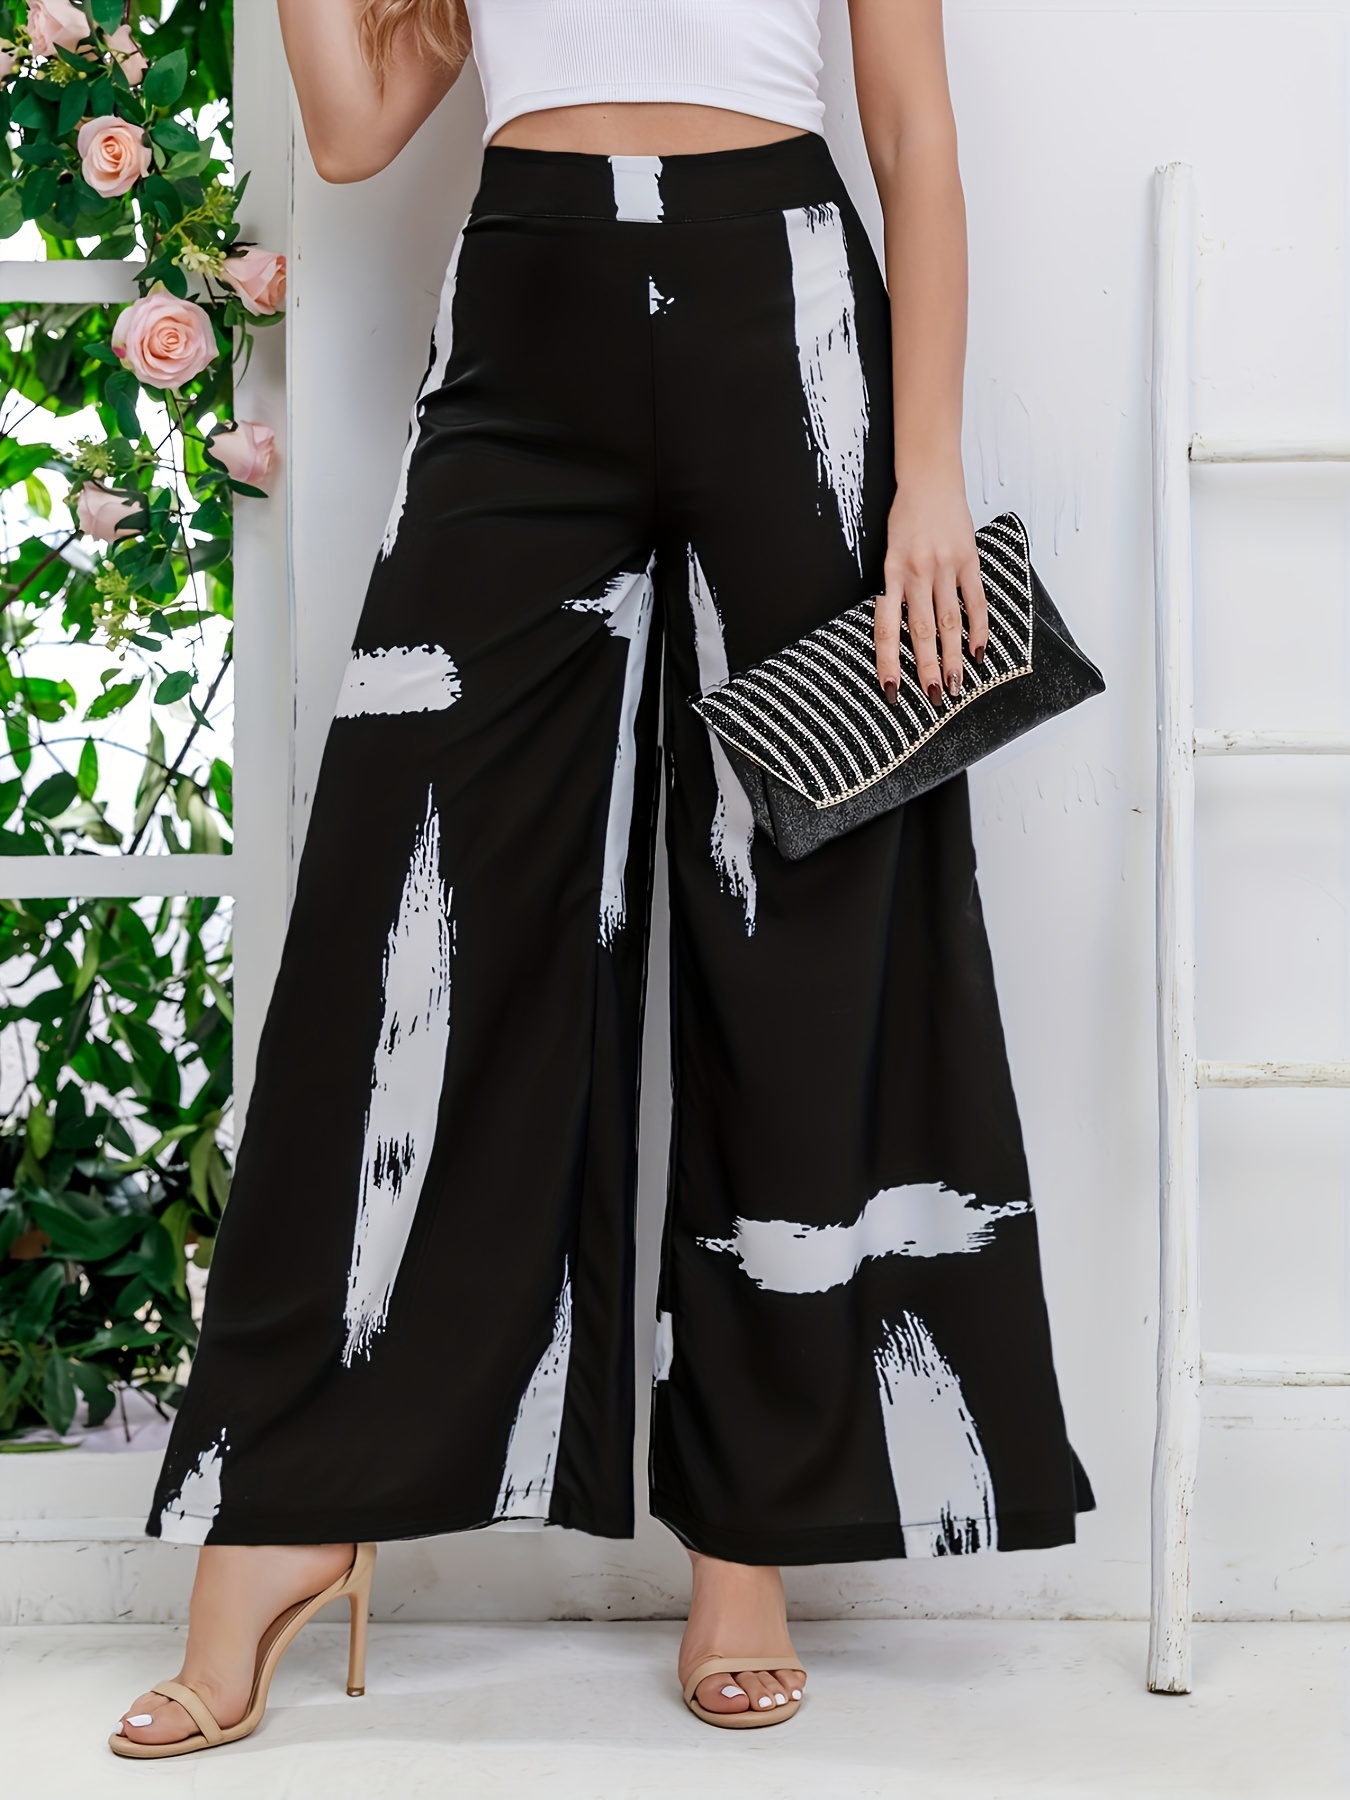 Women's Black With White Striped Casual Wide Leg Pants High